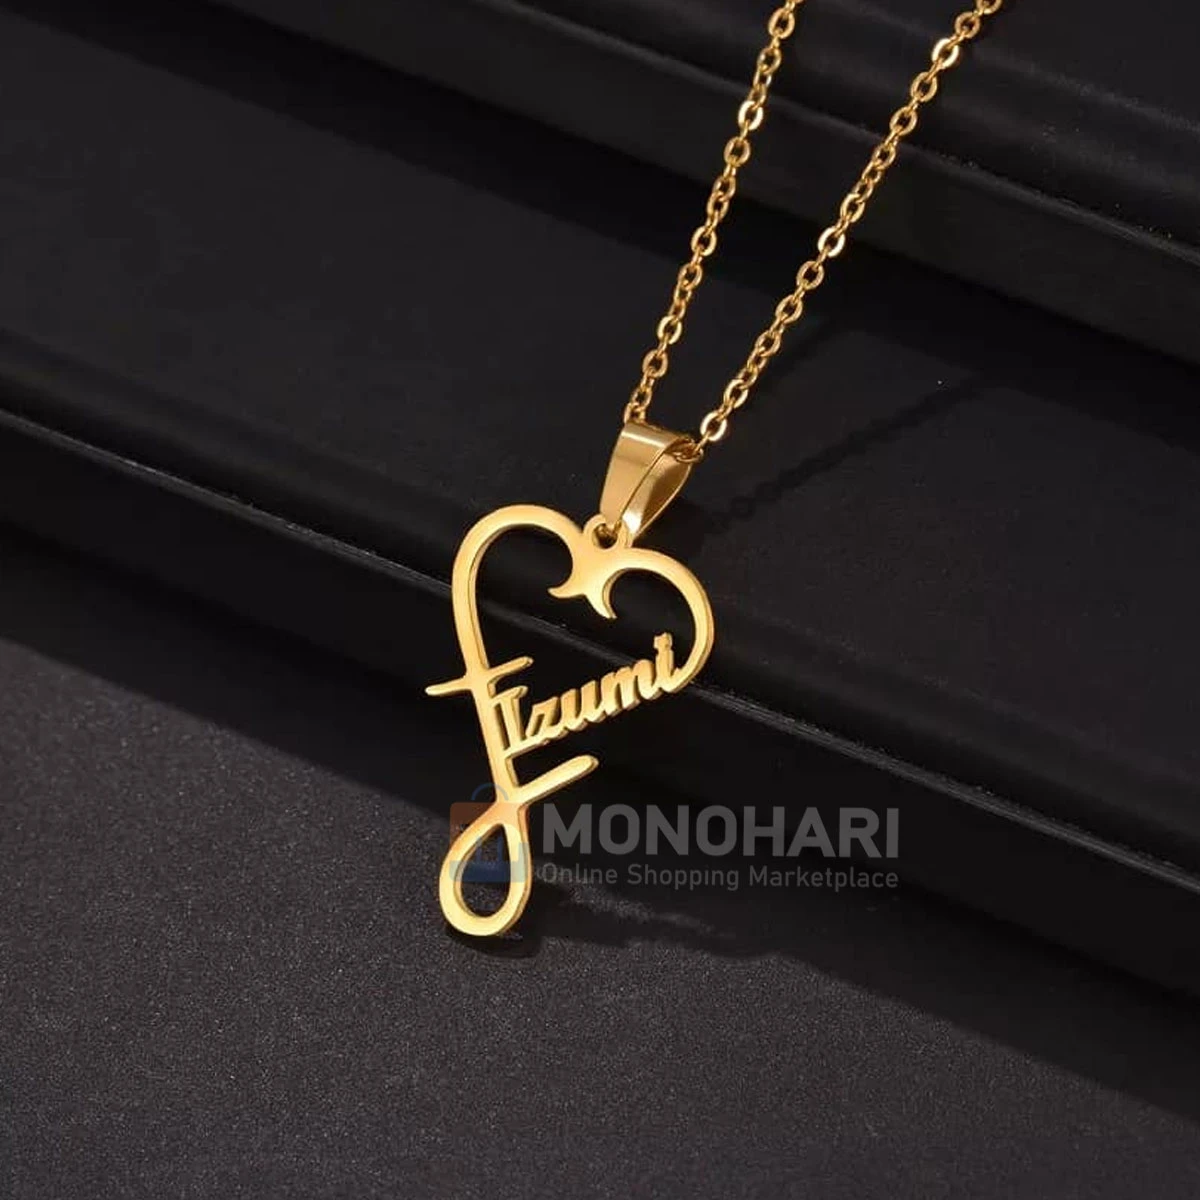 Single Name Necklace (Izumi) Between with Heart with round tail shape 22K Gold Plated Customized Necklace